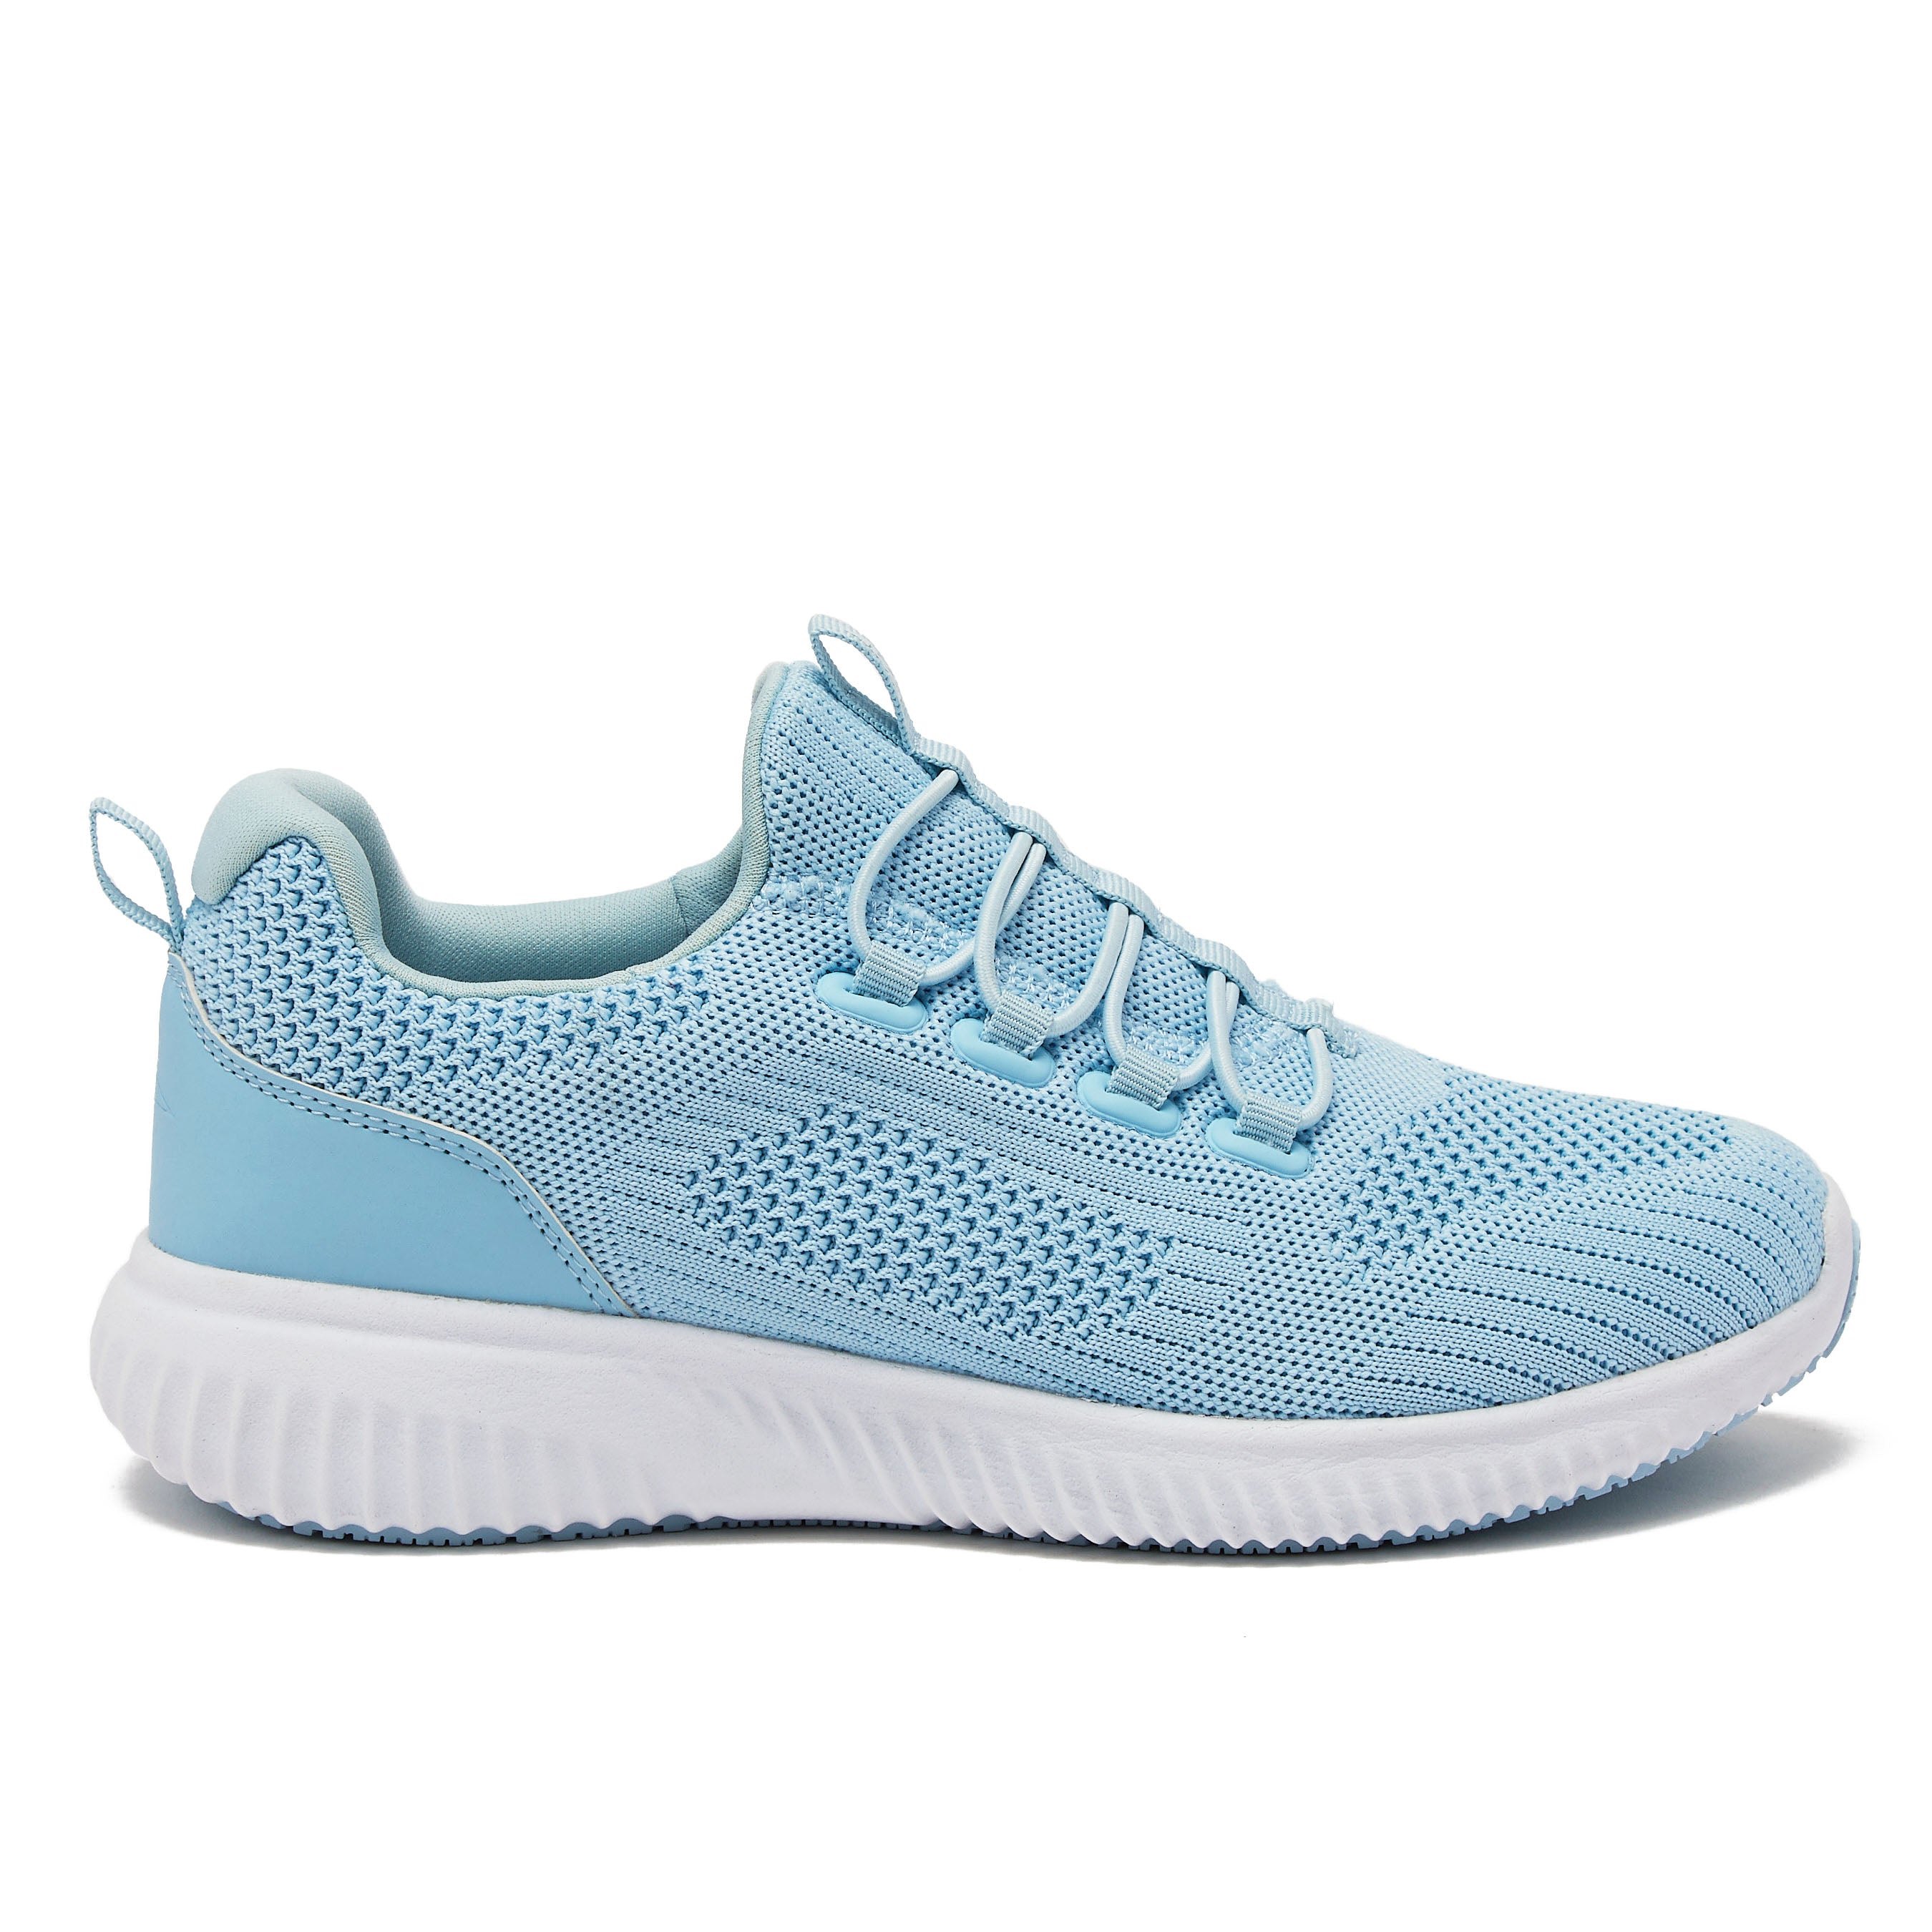 Avia Women's 5000 Performance Sneakers, Wide Width Available